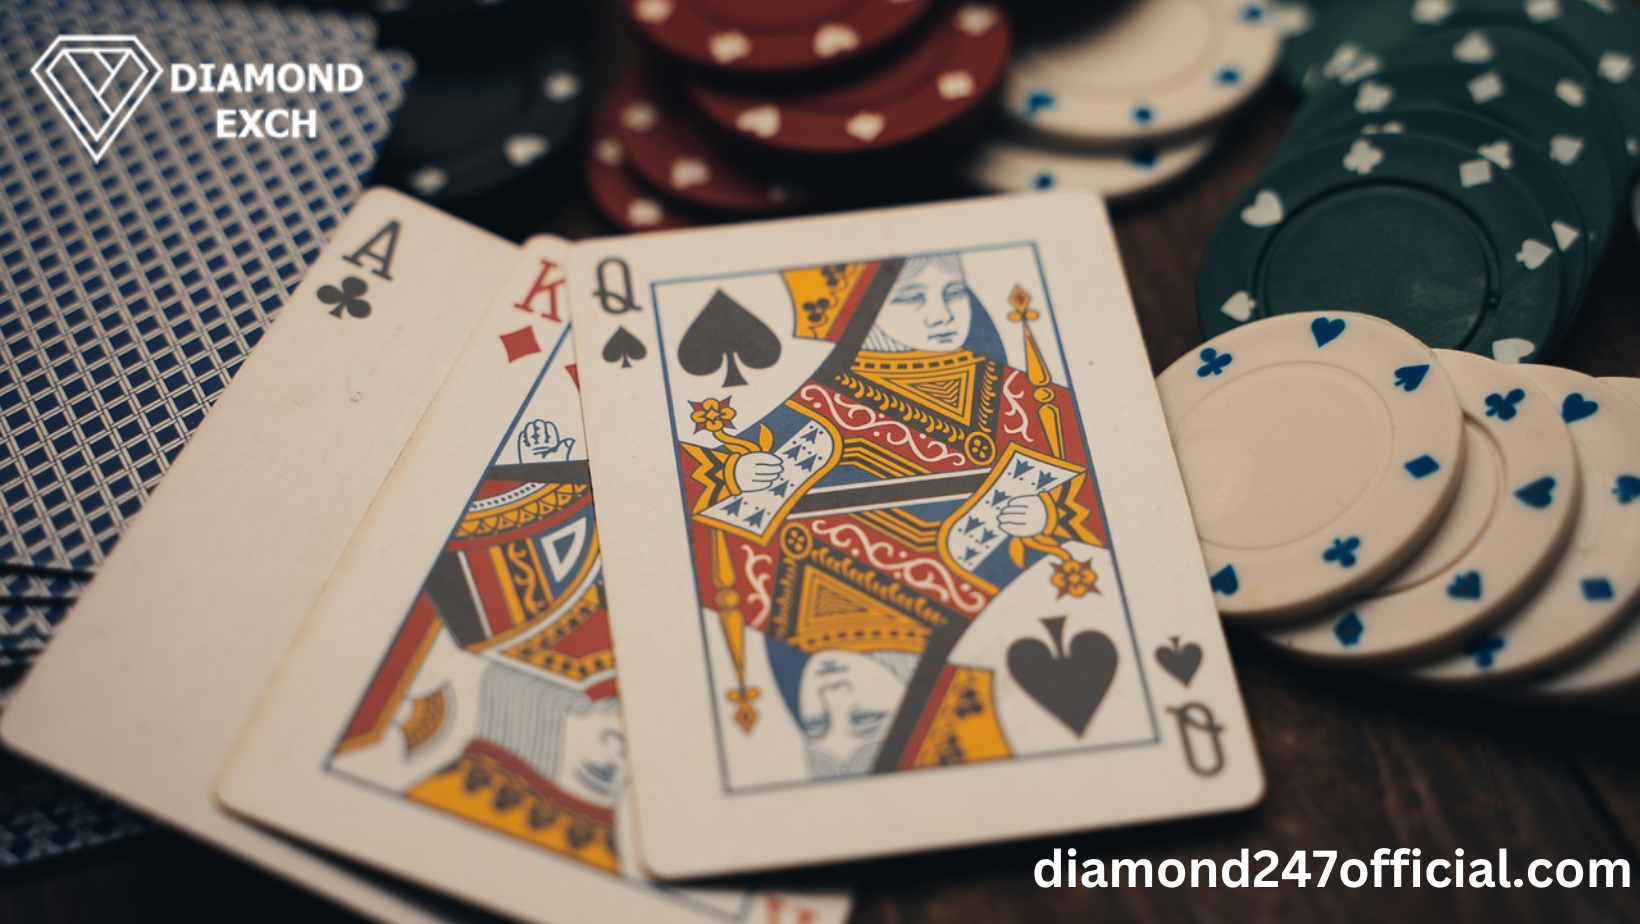 Diamondexch Is The Most Favourite Platform For Online Casino Game